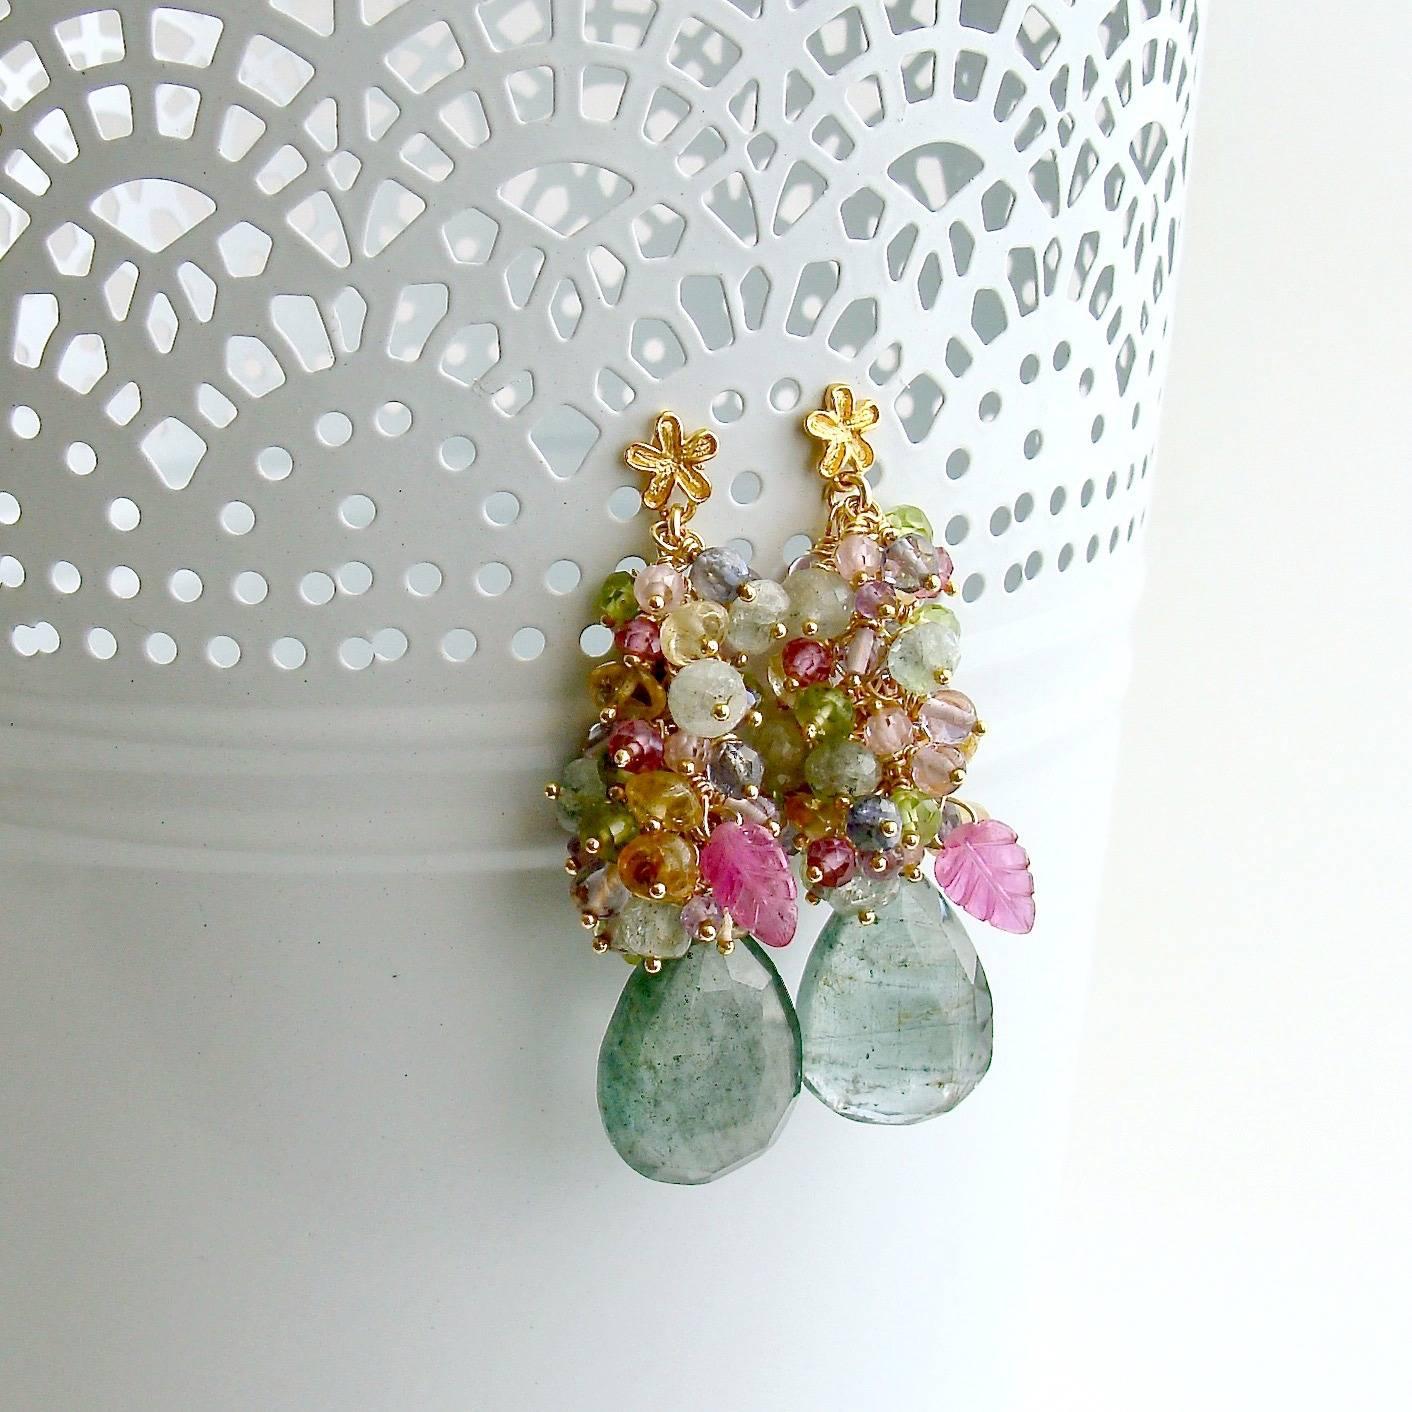 Fleur V Earrings.

After a harsh and cold winter, everyone is ready for the happy colors of spring and these perennial favorite earrings don’t disappoint. A riot of pastel spring colors mimics the beautiful colors of a spring garden for a